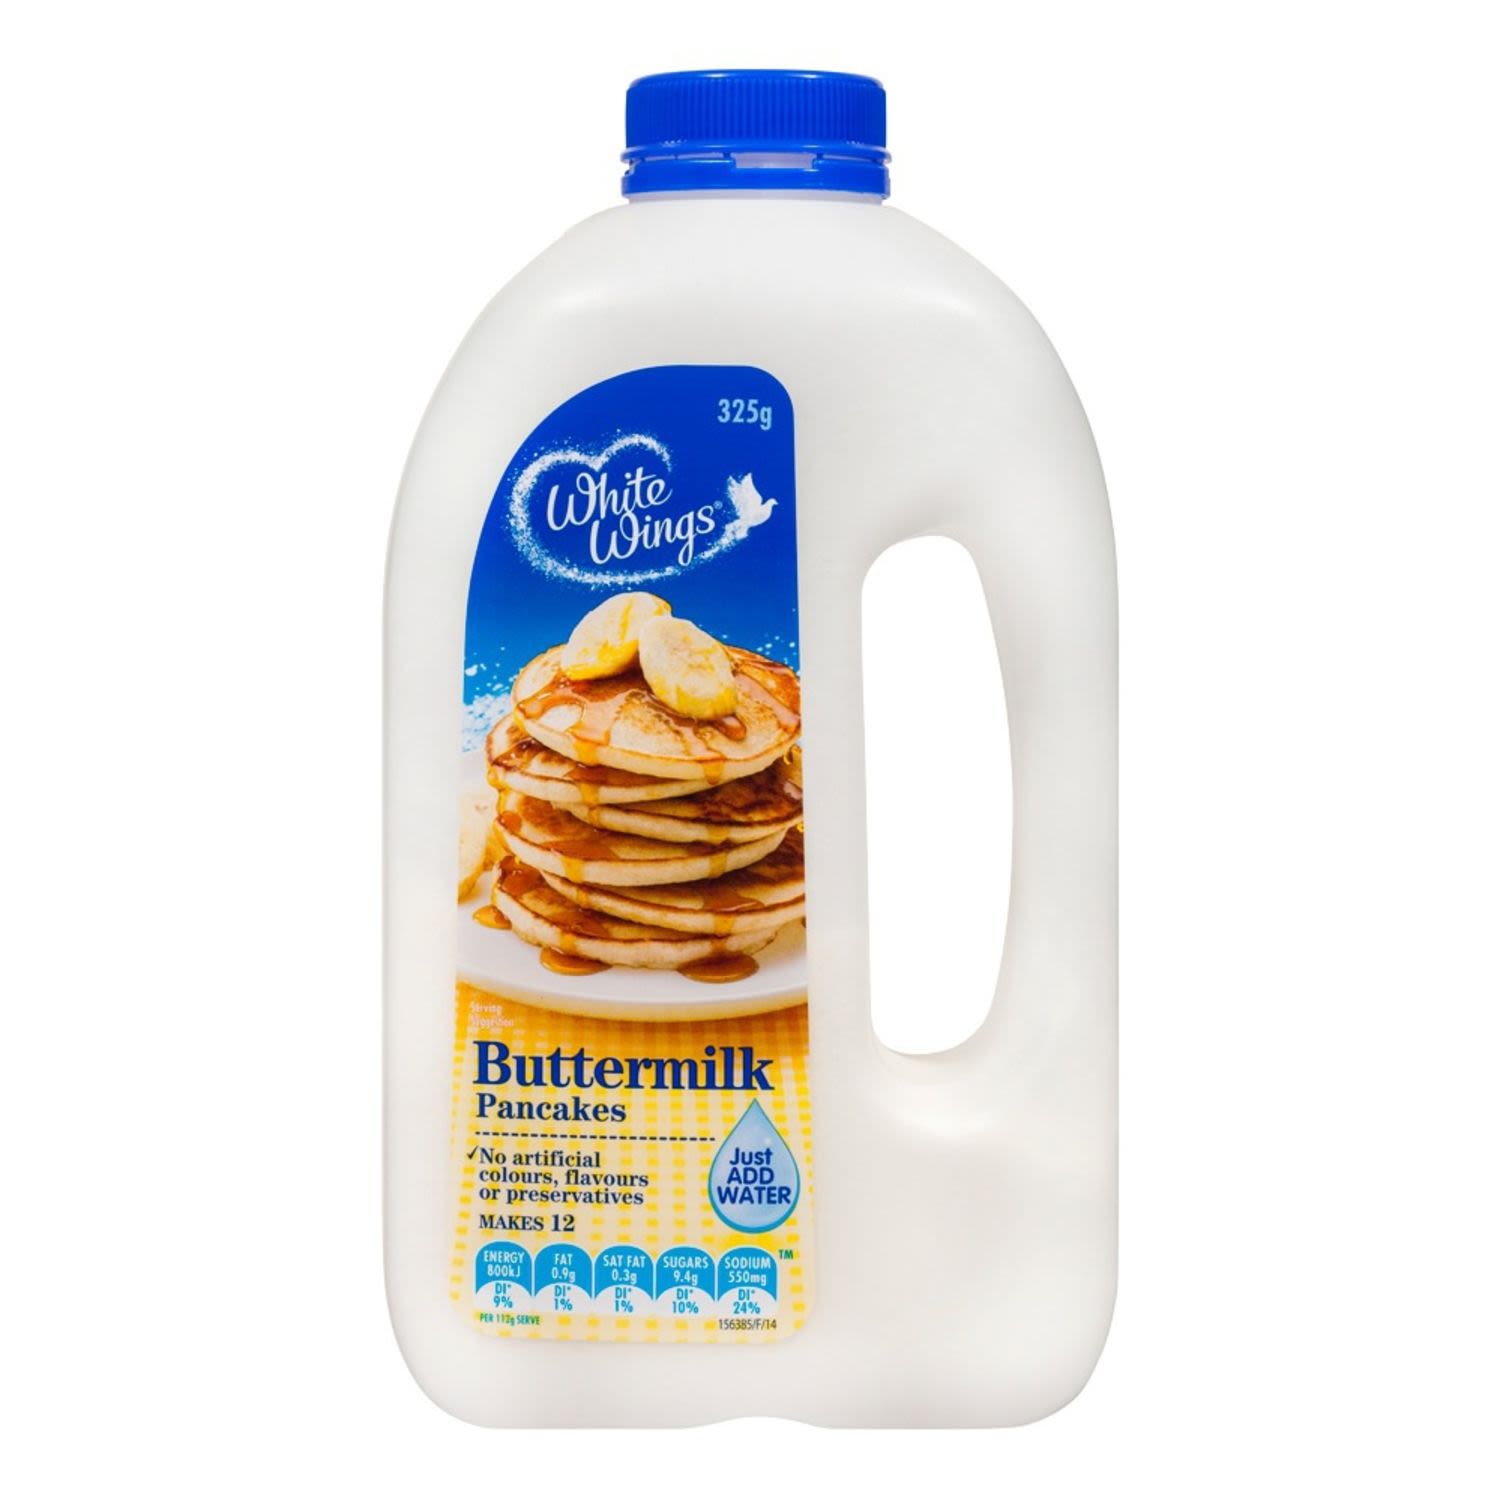 Delicious light and fluffy buttermilk pancakes ready in minutes, simply just add water, shake and cook.<br /> <br /><br />Allergen may be present: Egg|Milk|Wheat <br /><br />Country of Origin: Made in Australia from local and imported ingredients.